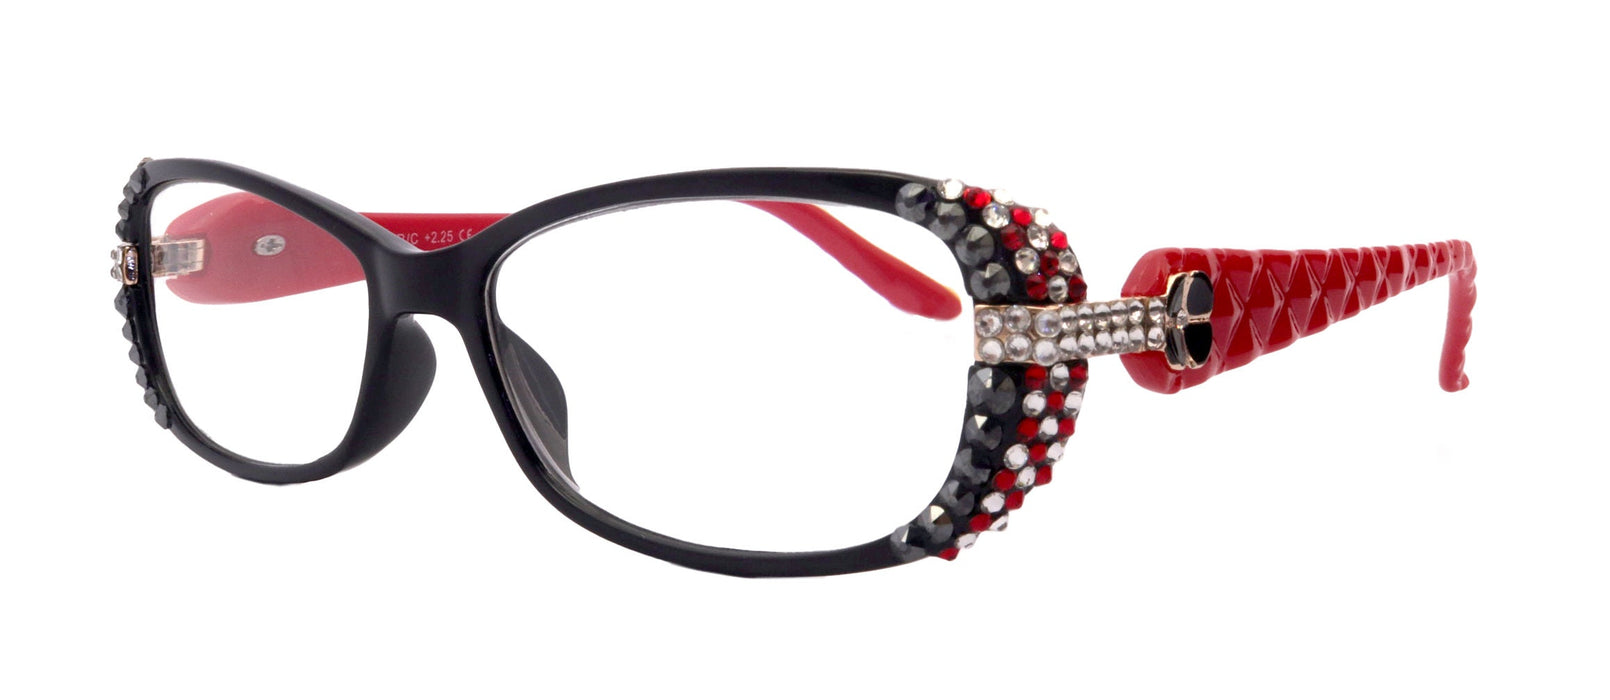 Glamour Quilted, (Bling) Reading Glasses For Women W (Hematite, Clear, siam) Genuine European Crystals(Red, Black) NY fifth avenue